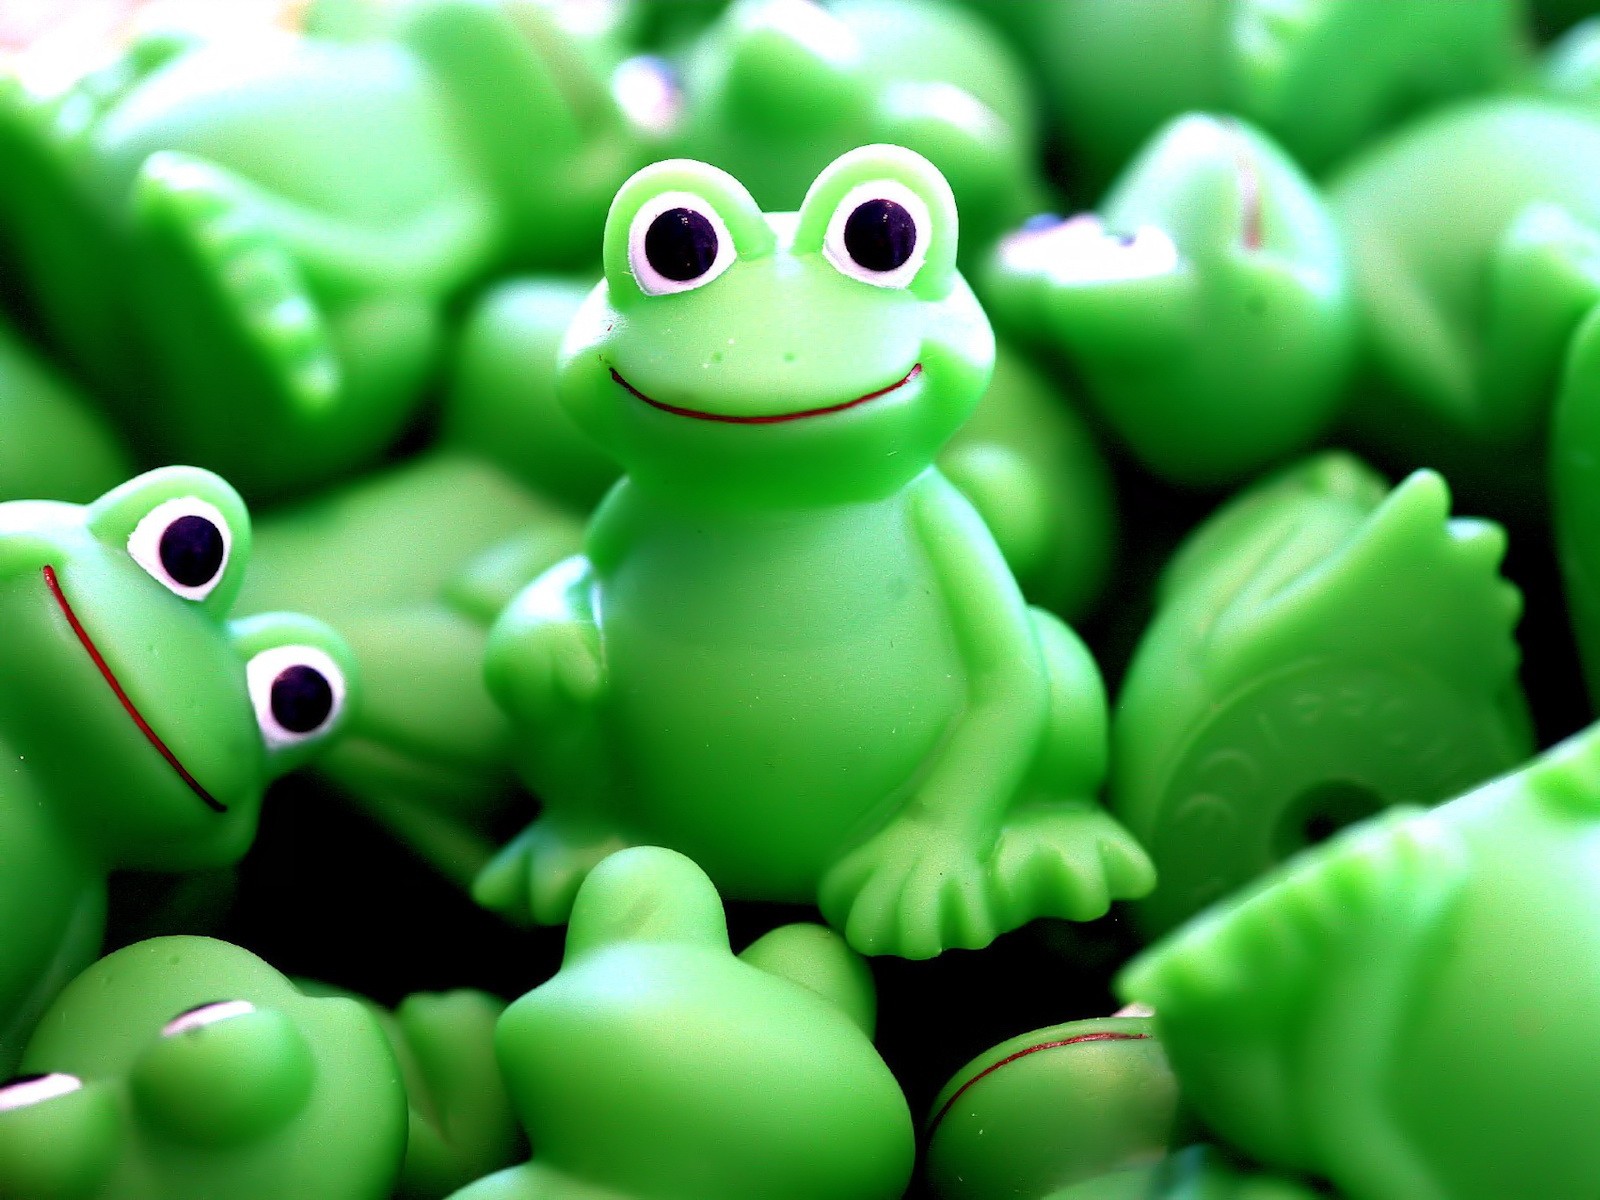 Desktop wallpaper named Toy | Green Frogs featuring a man-made toy with green frogs on it.